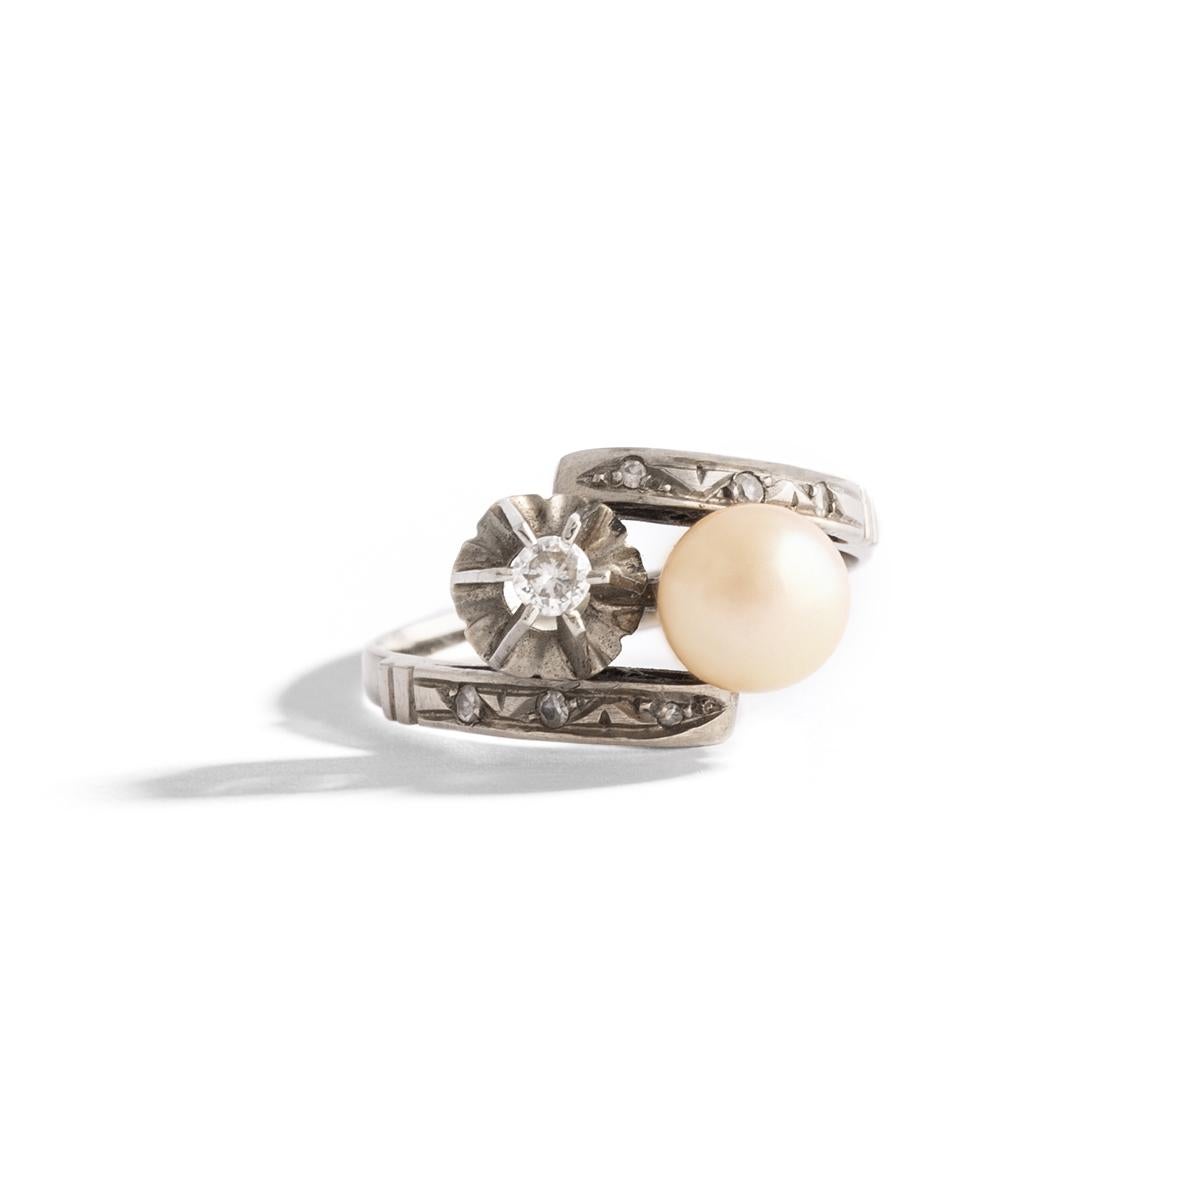 Pearl and Diamond white Gold Ring.
Pearl diameter: approximately 6.57 millimeters.
Diamond estimated weight: 0.16 carat.
Ring Size: 7.